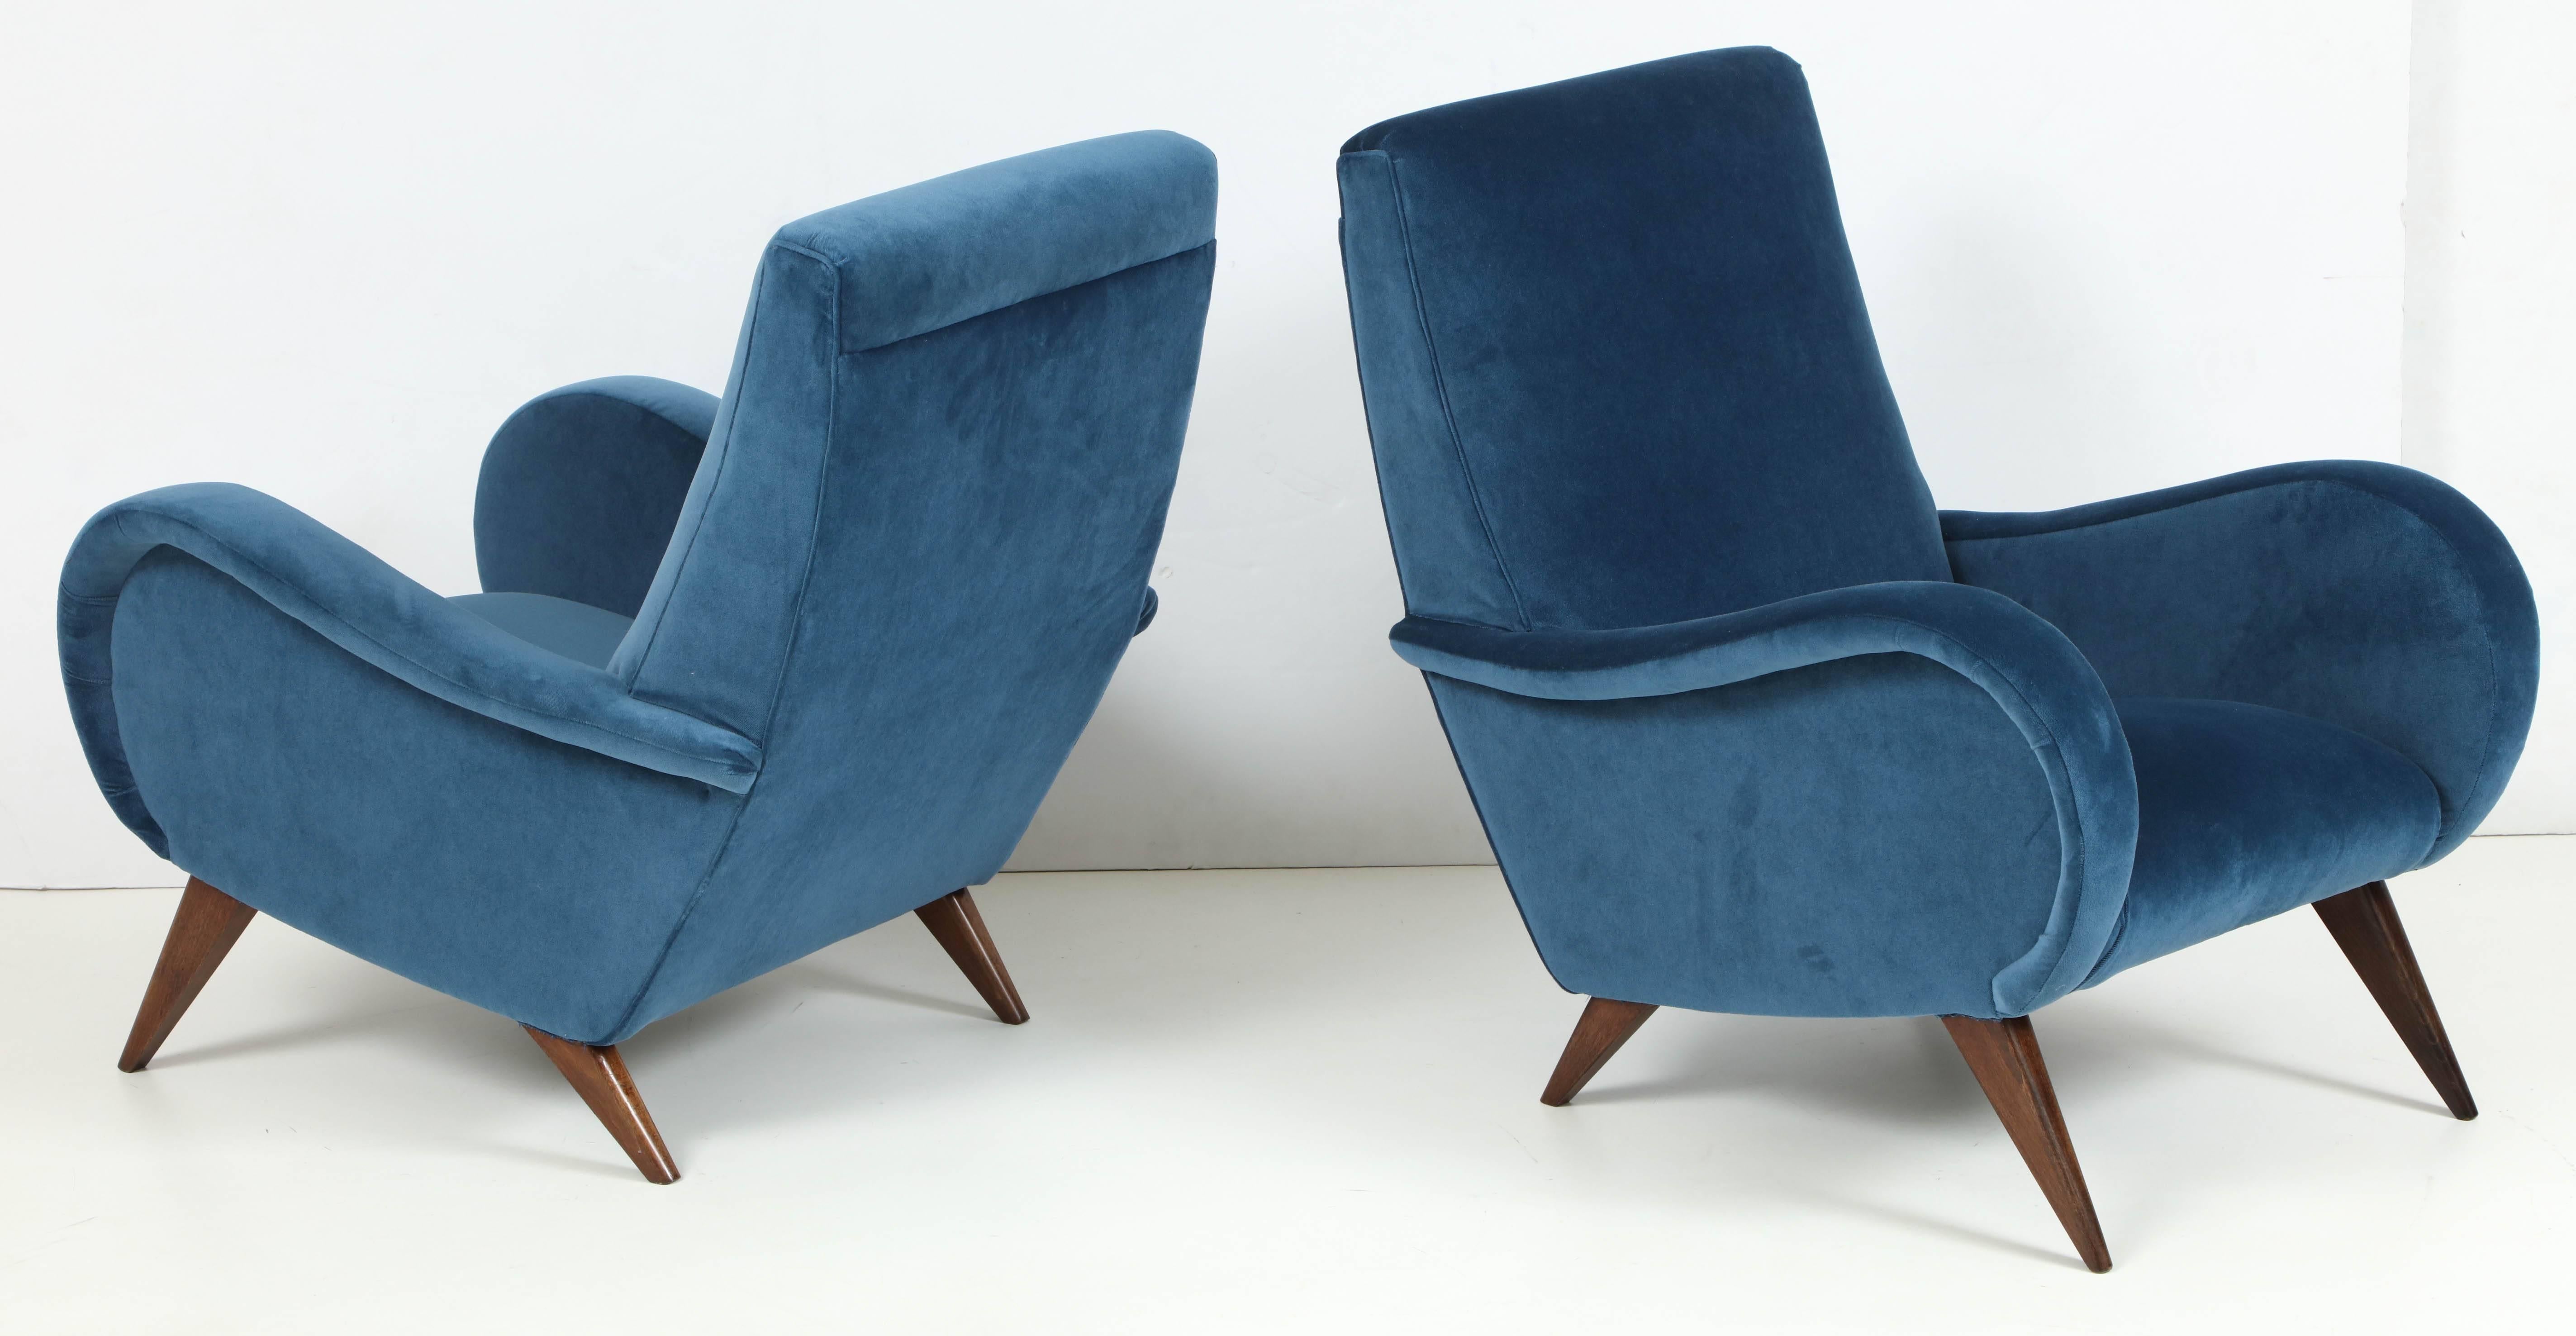 Fabulous style and craftsmanship, this pair of Italian Mid-Century Modern lounge chairs are as beautiful as they are comfortable. Quintessential Italian style in its curvy arms and simplistic style. Professionally restored down to the hand polished